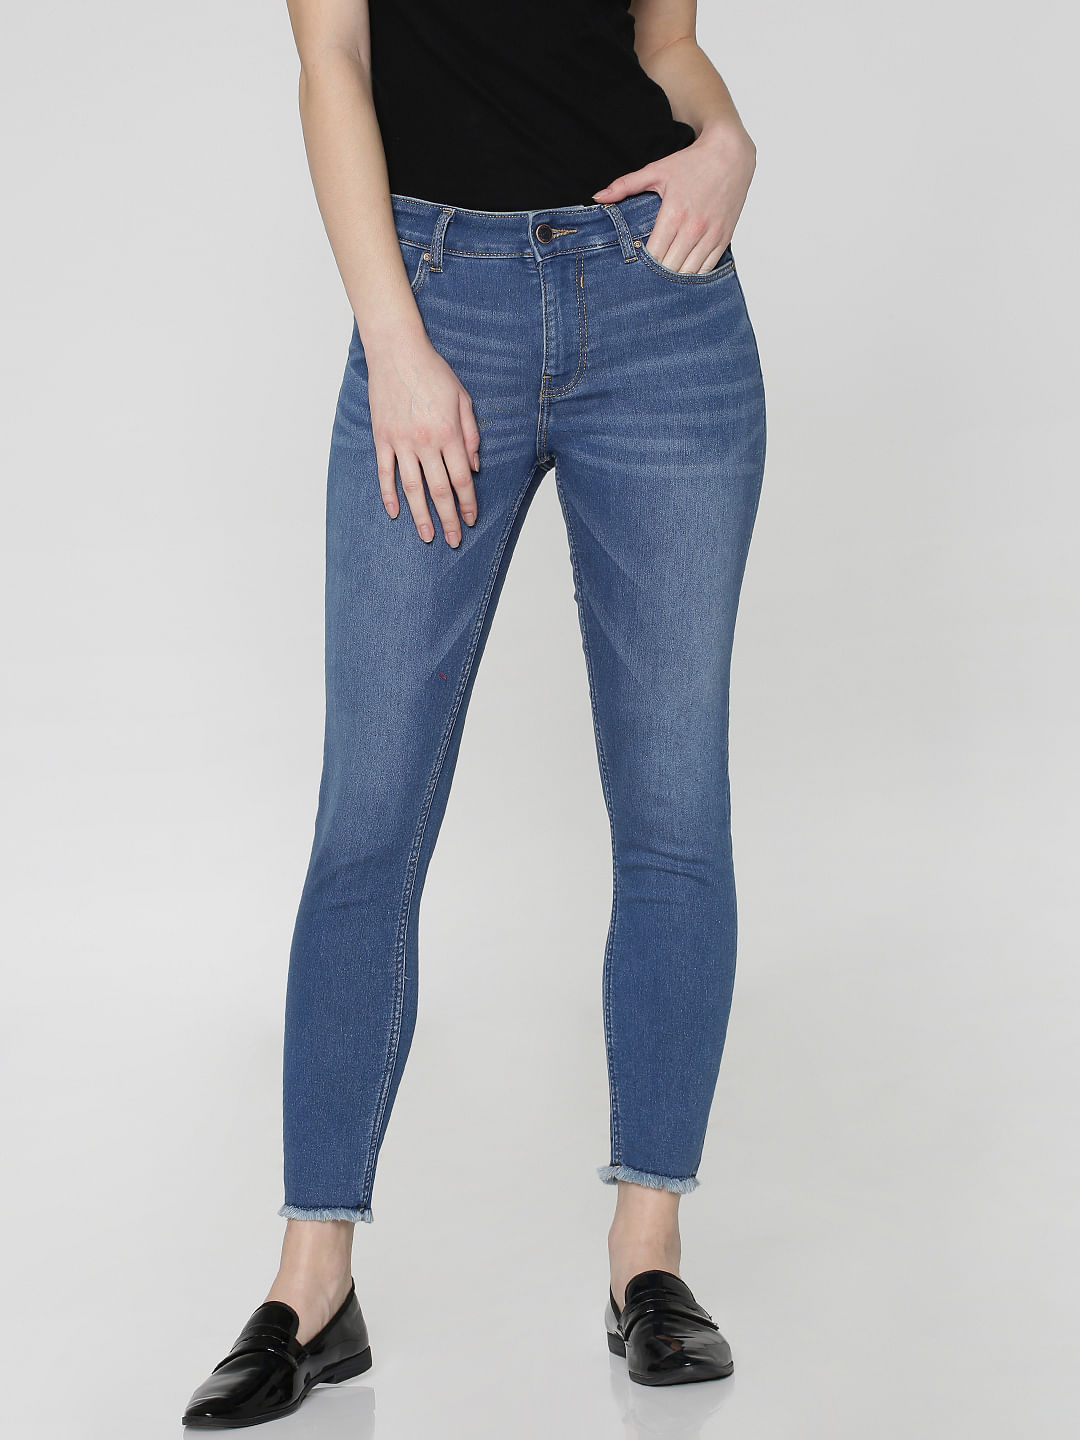 ankle length jeans online